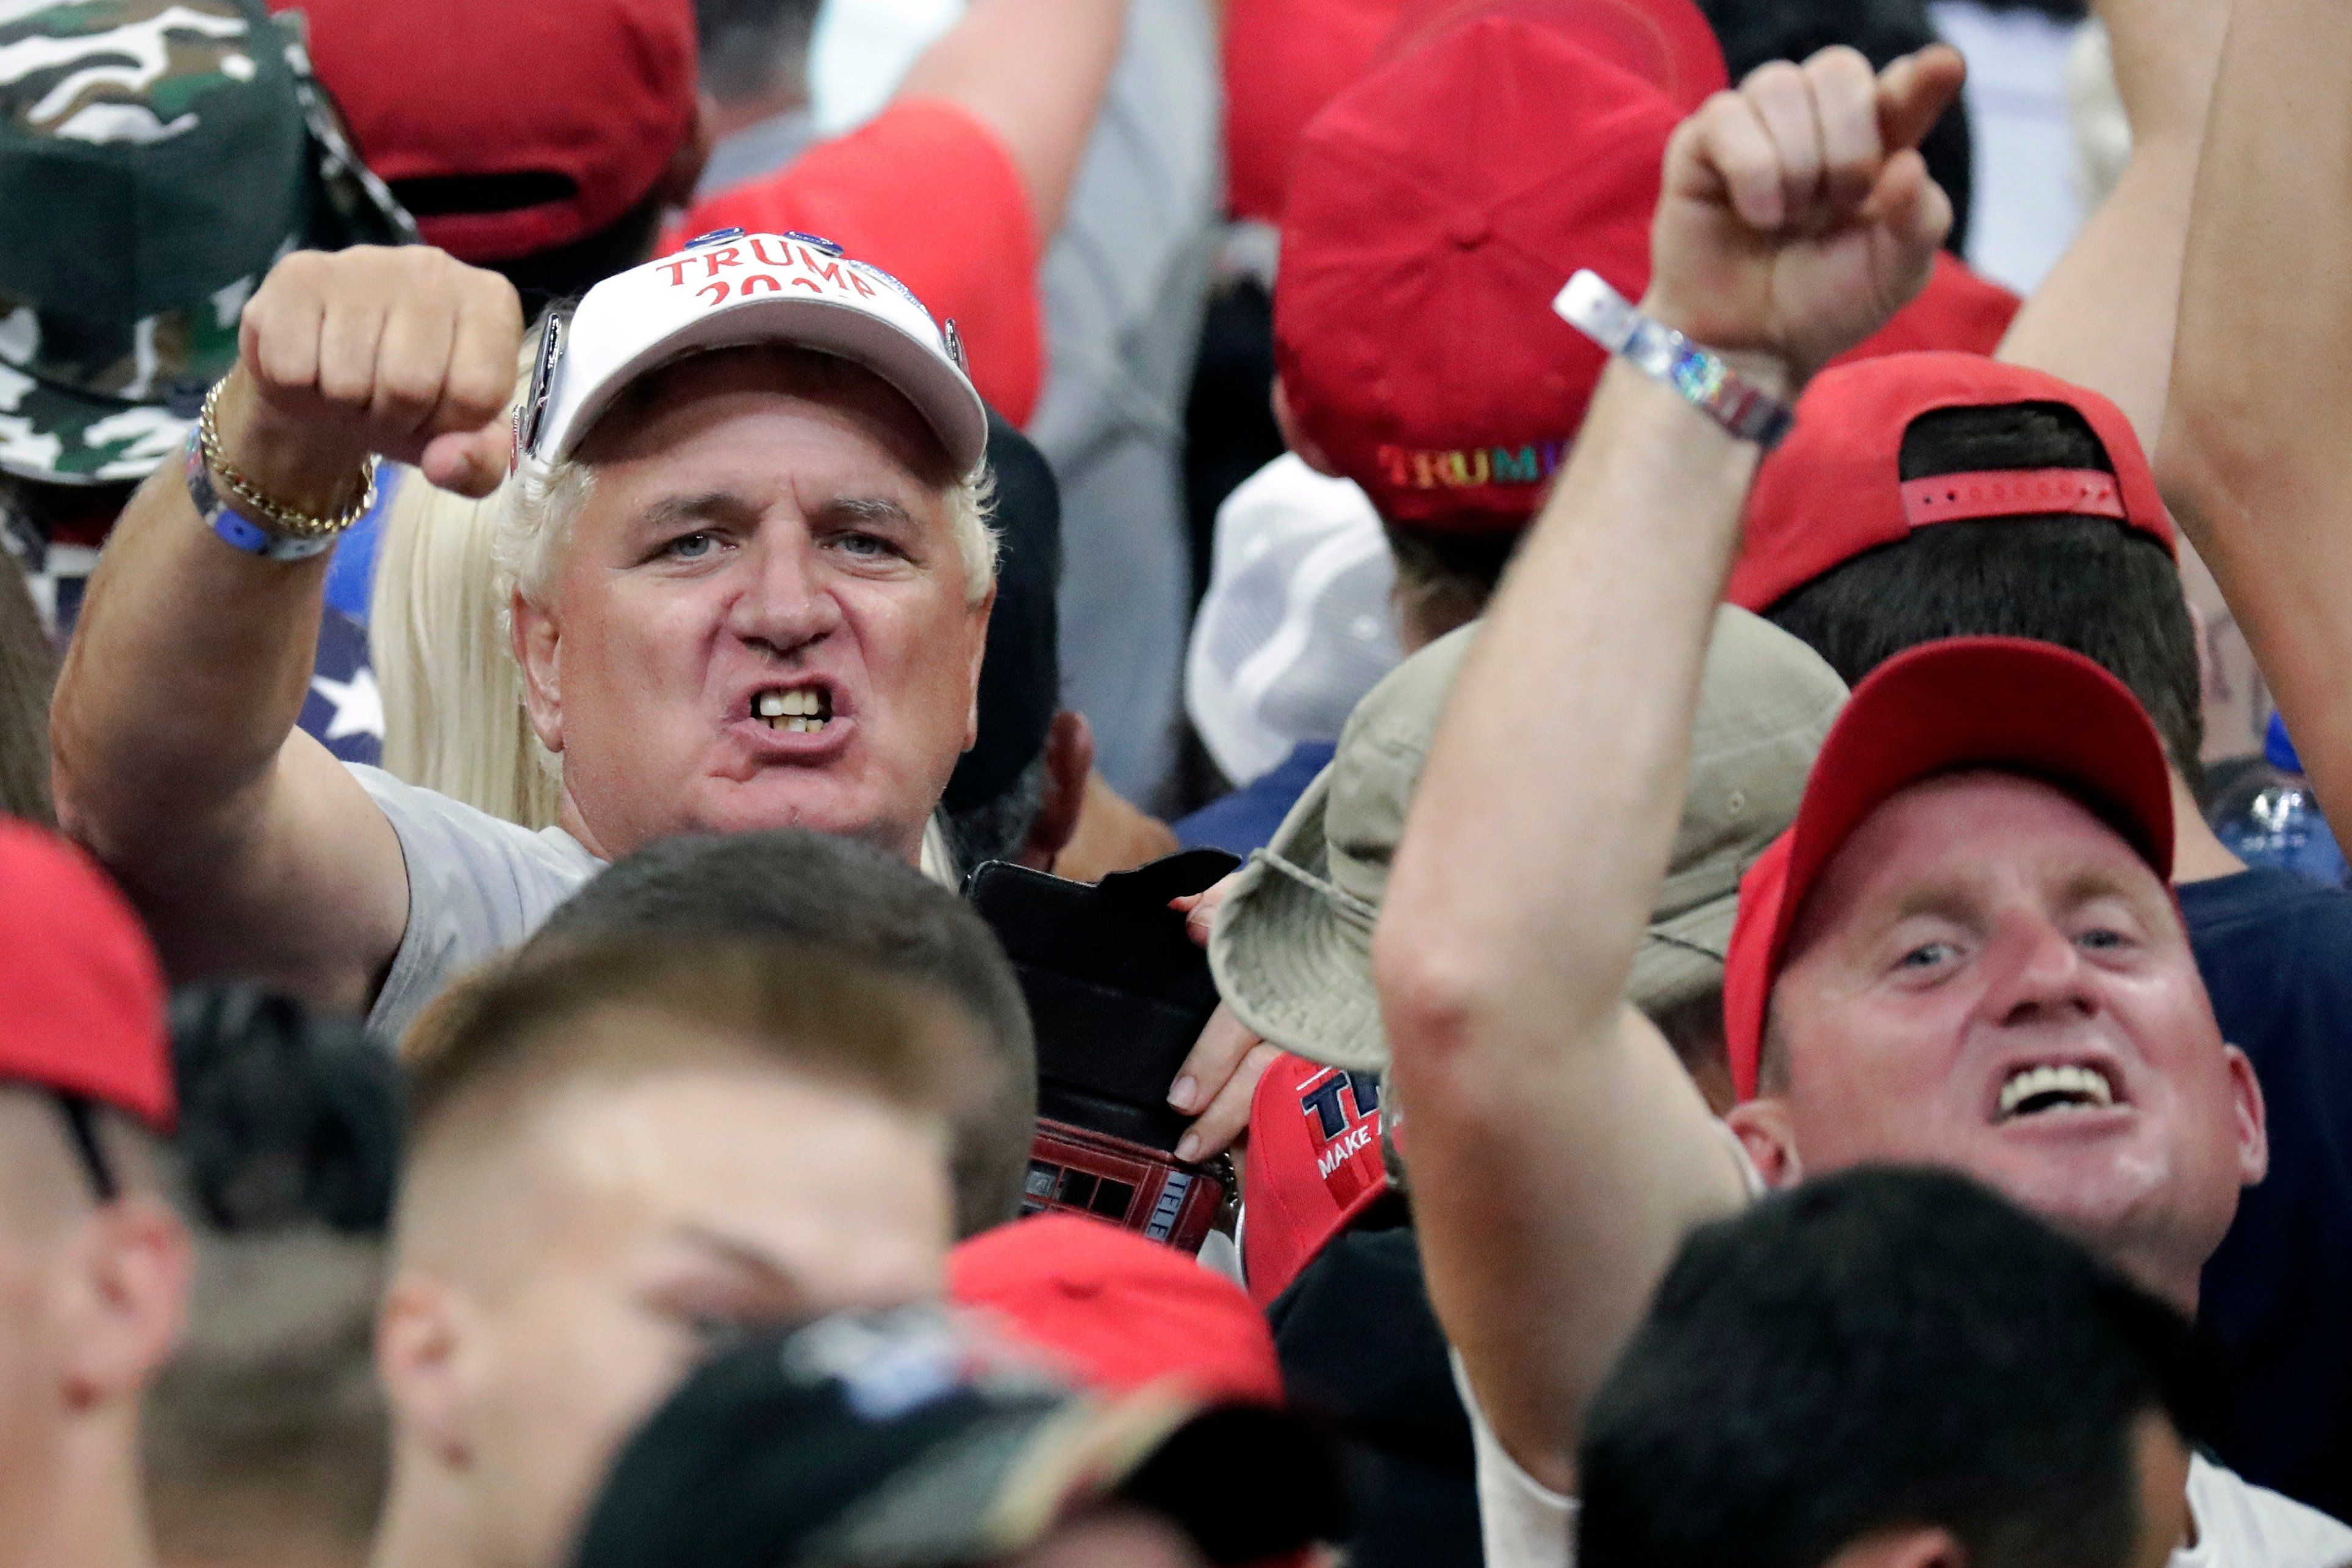 President Donald Trump supporters shake their fists at the media as Trump formally announced his 2020 re-election bid Tuesday, June 18, 2019, in Orlando, Fla